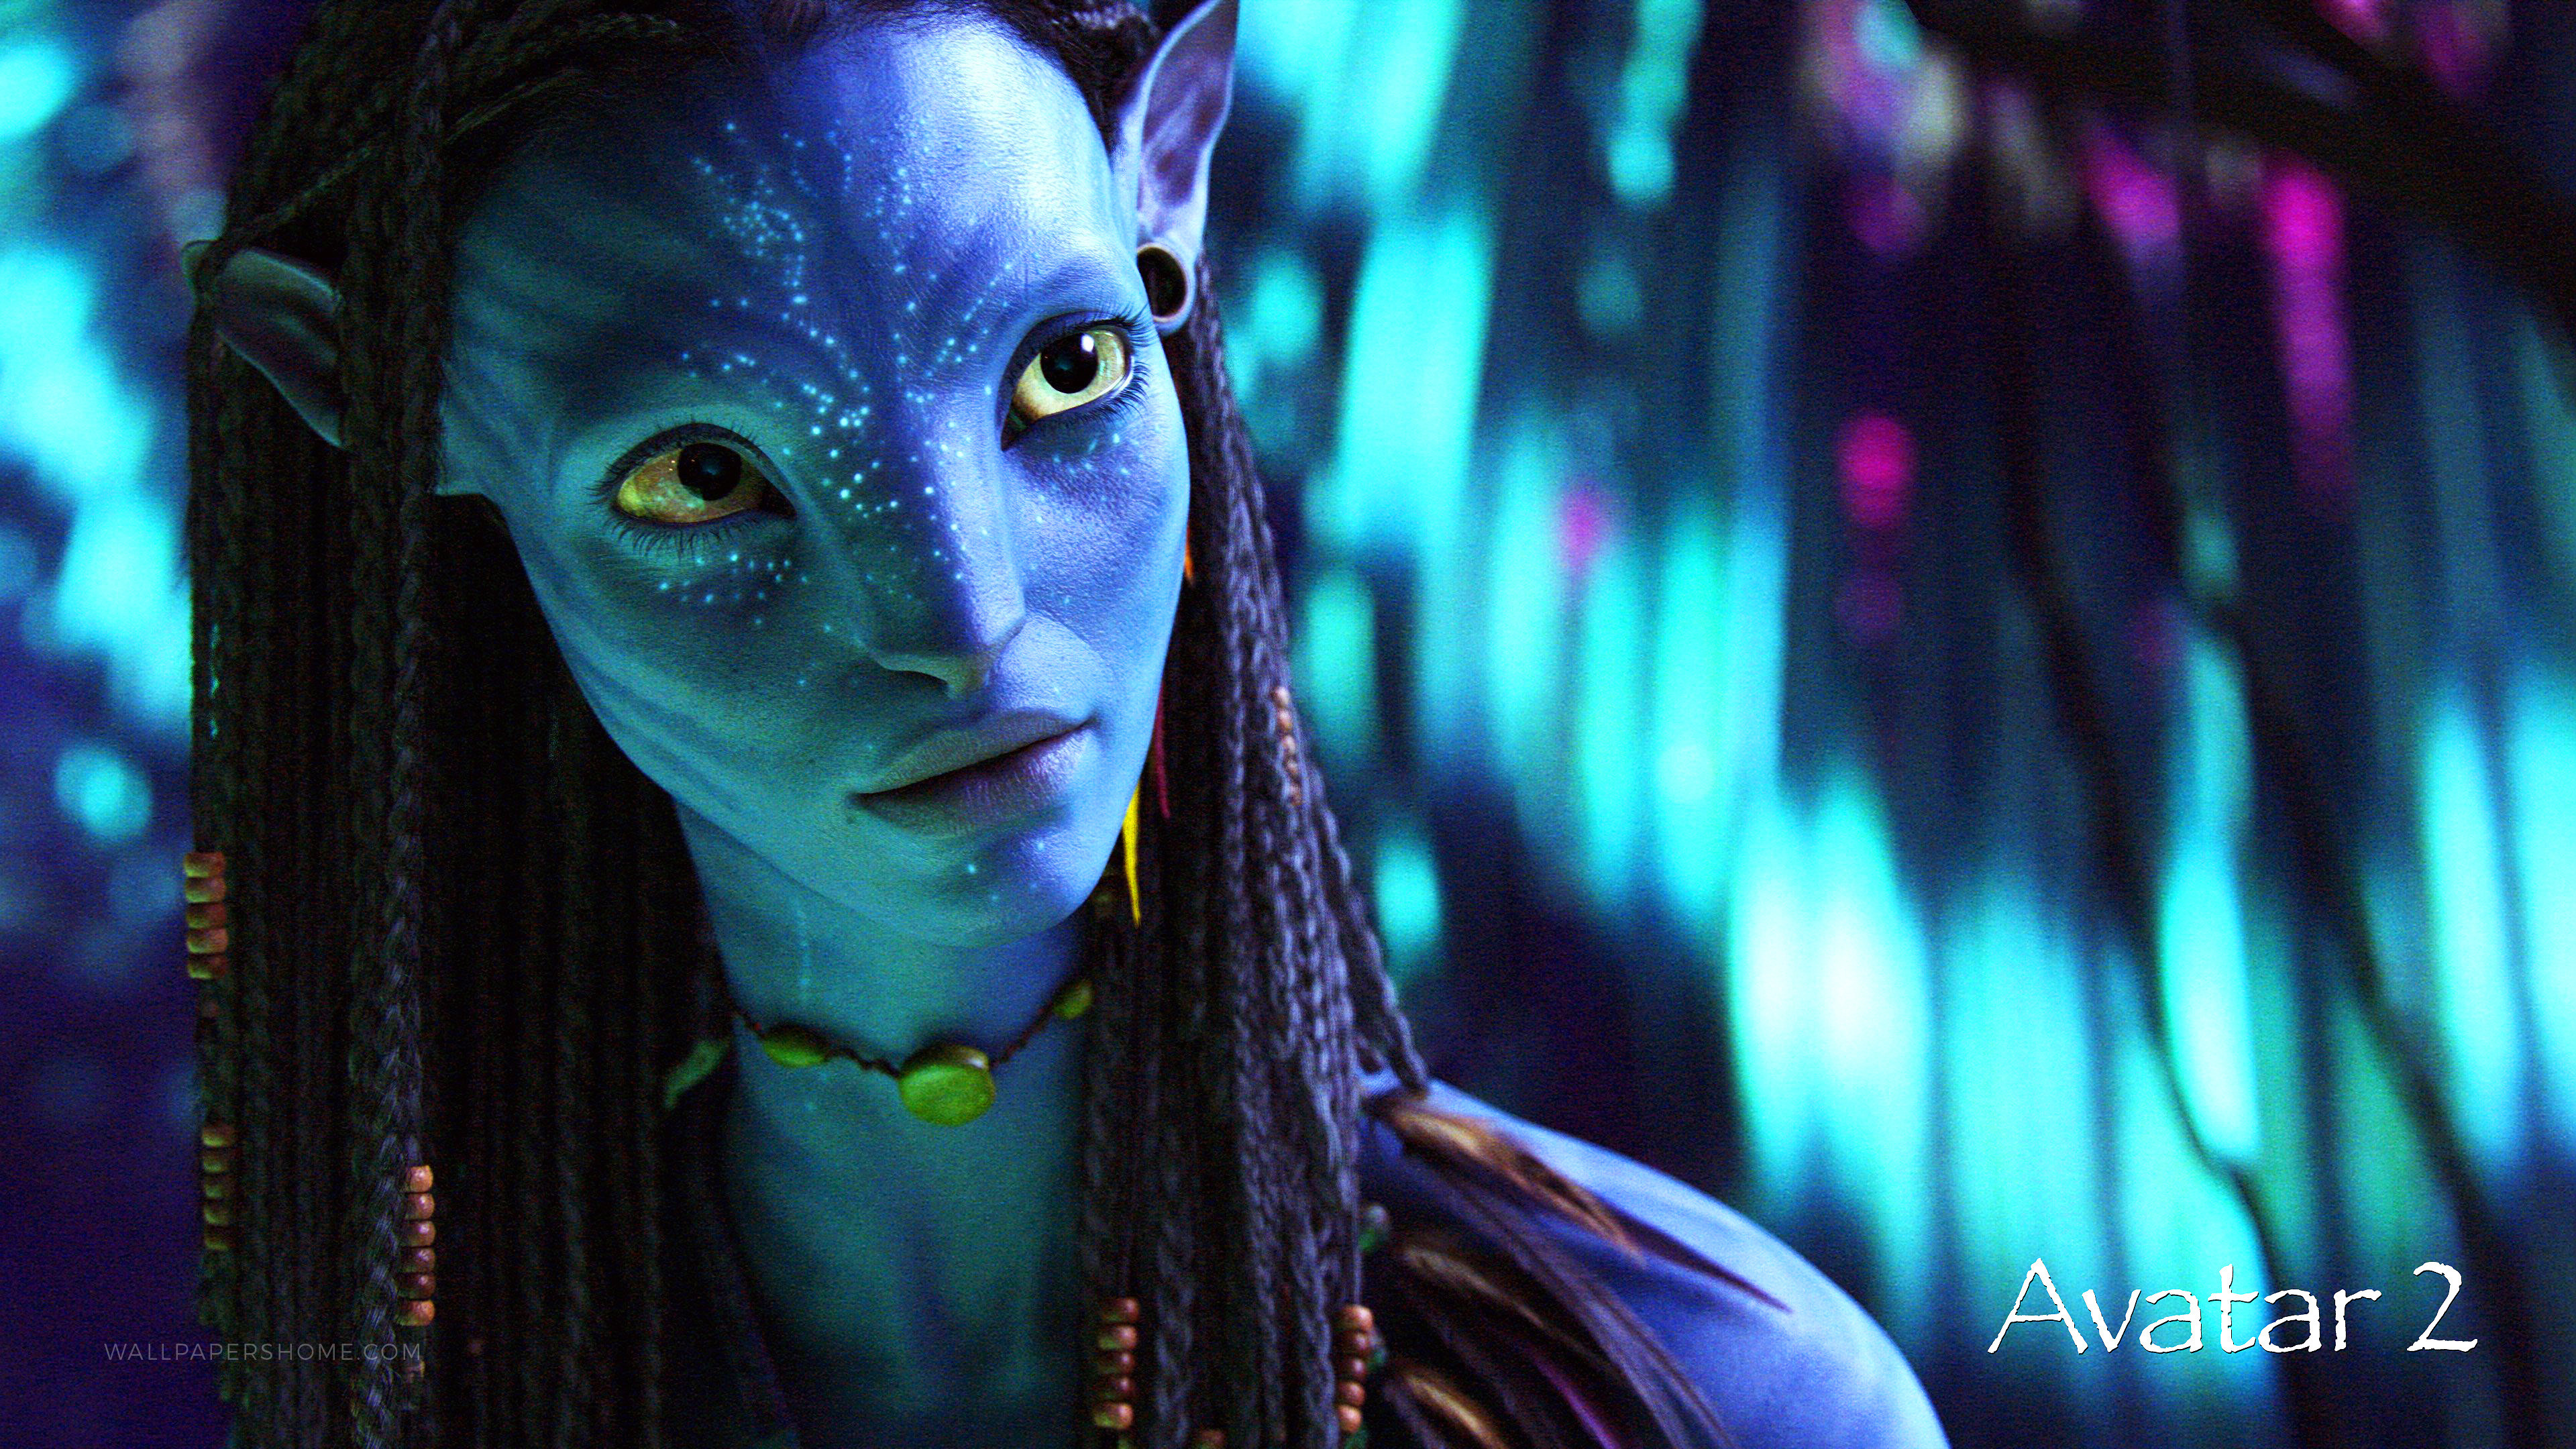 Wallpaper Avatar 2, poster, 4k, Movies #17870 - Page 3